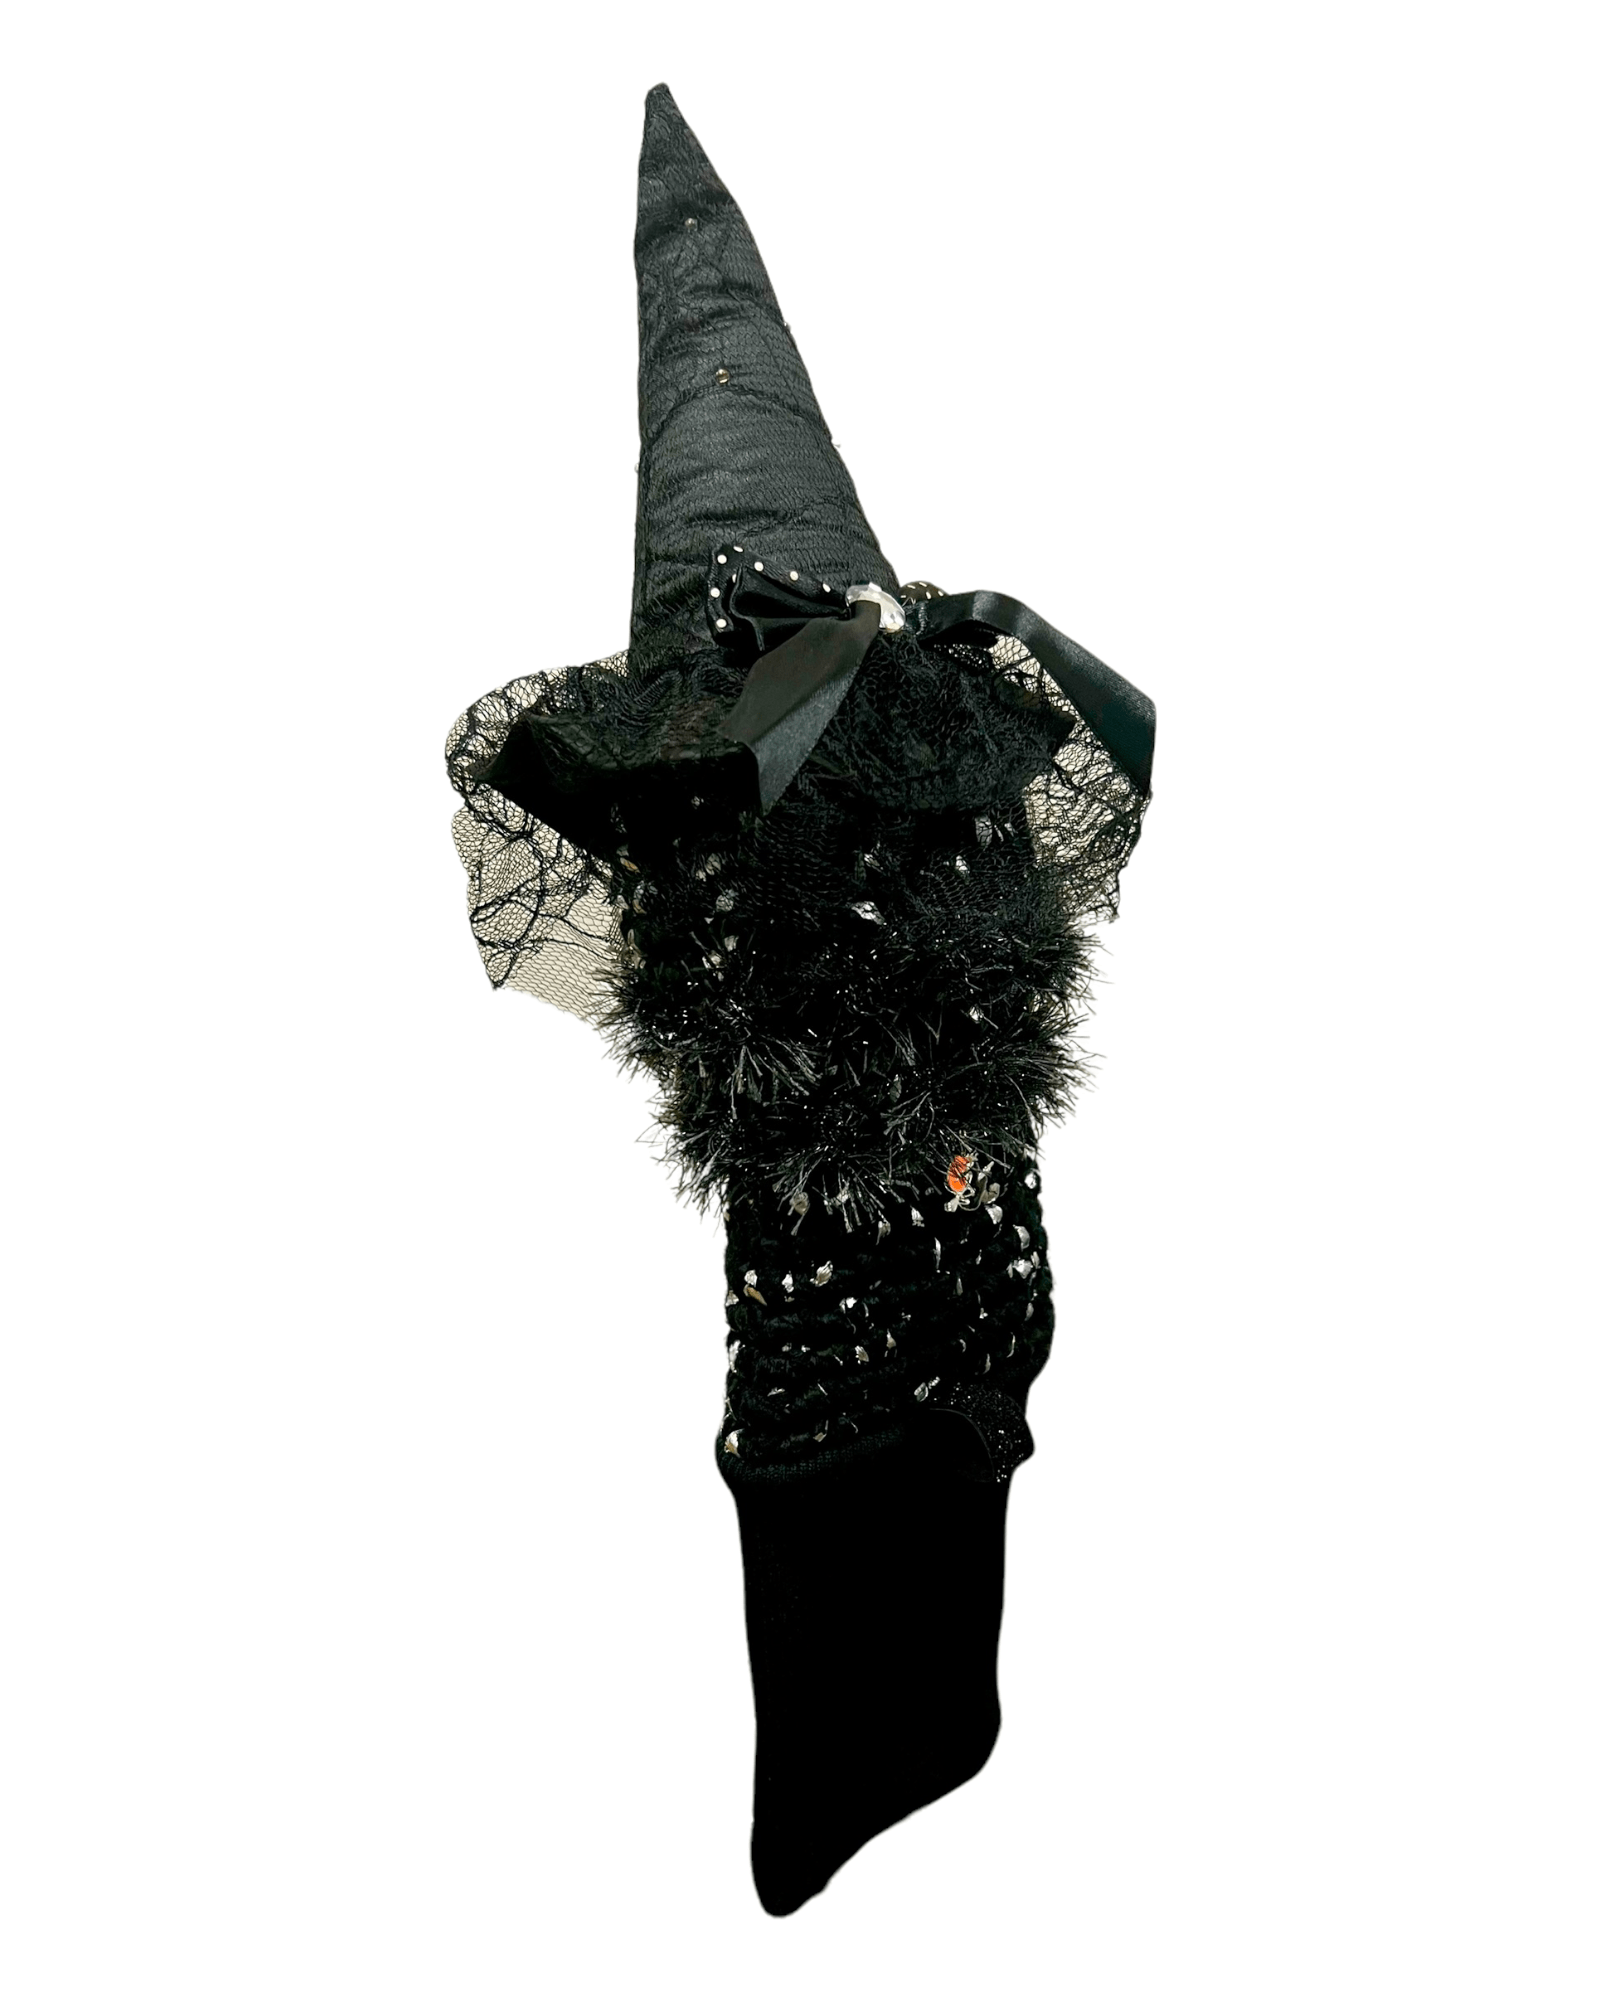 Black hat with spooky veil Hat